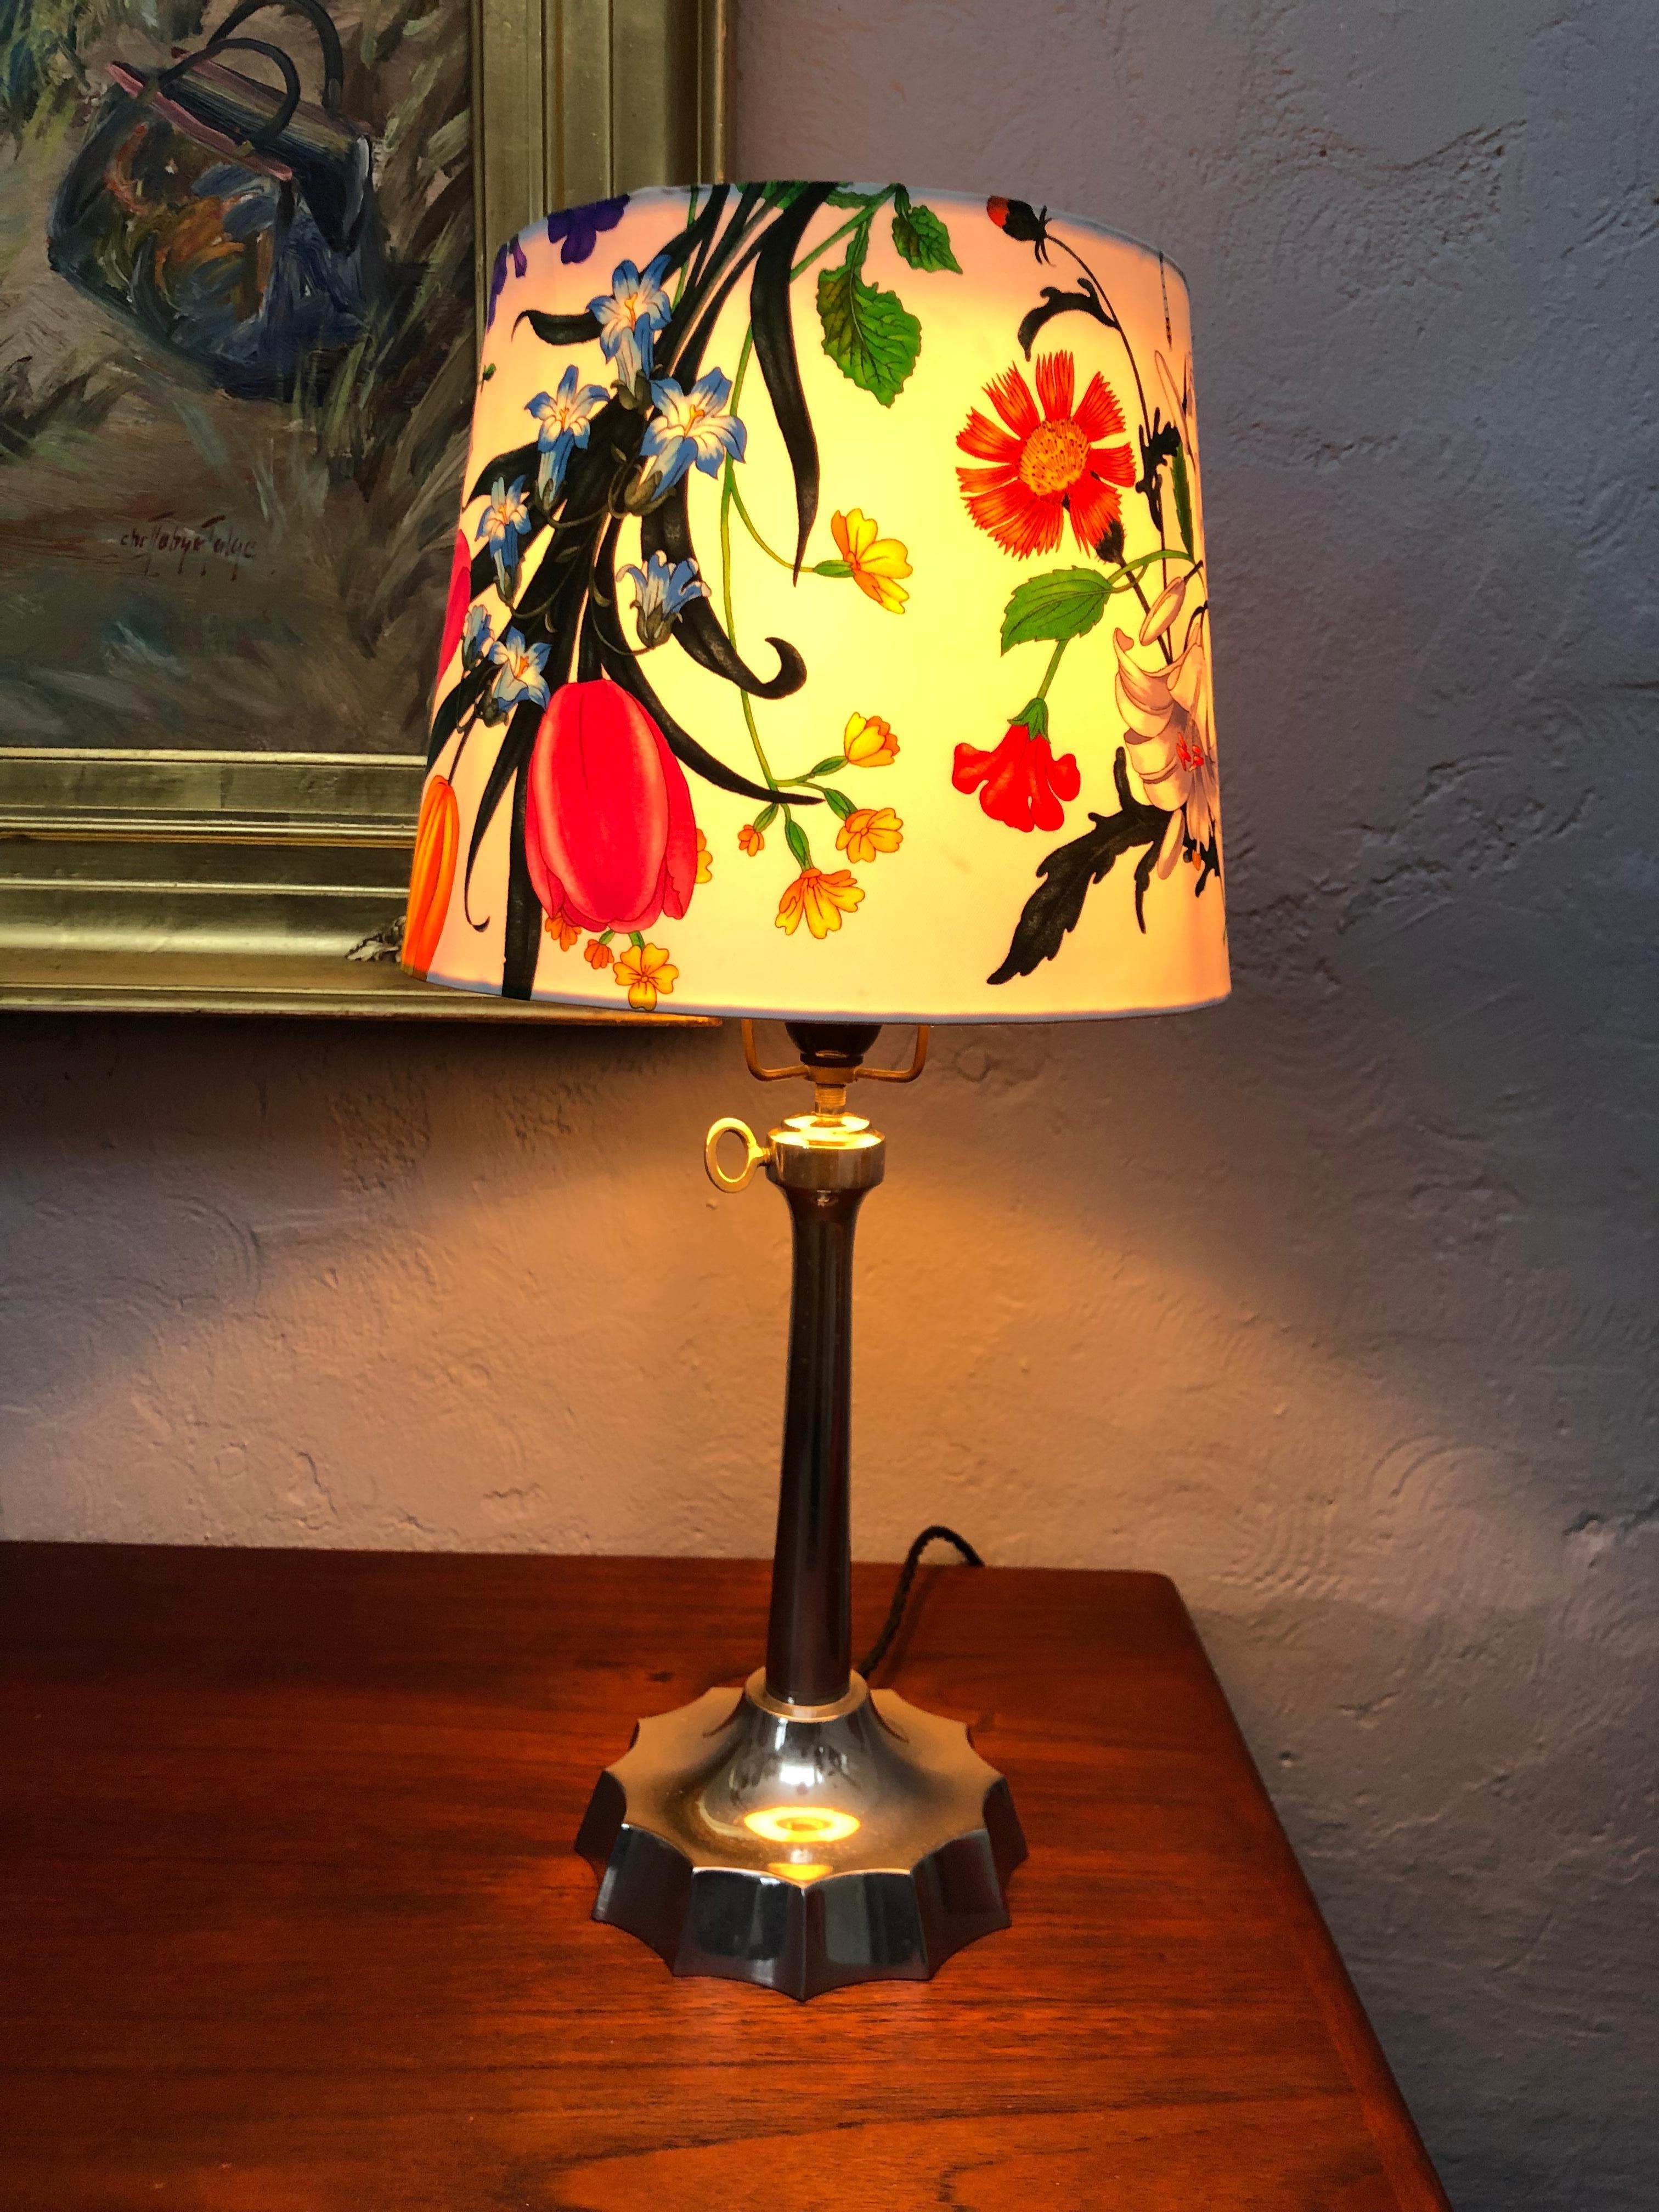 An antique Art Deco table lamp with slight Brutalist tones.
In cast aluminum with adjustable height from 50-60cm.
The discovery of aluminium was announced in 1825 by Danish physicist Hans Christian Ørsted.
The lamp is completely original and still